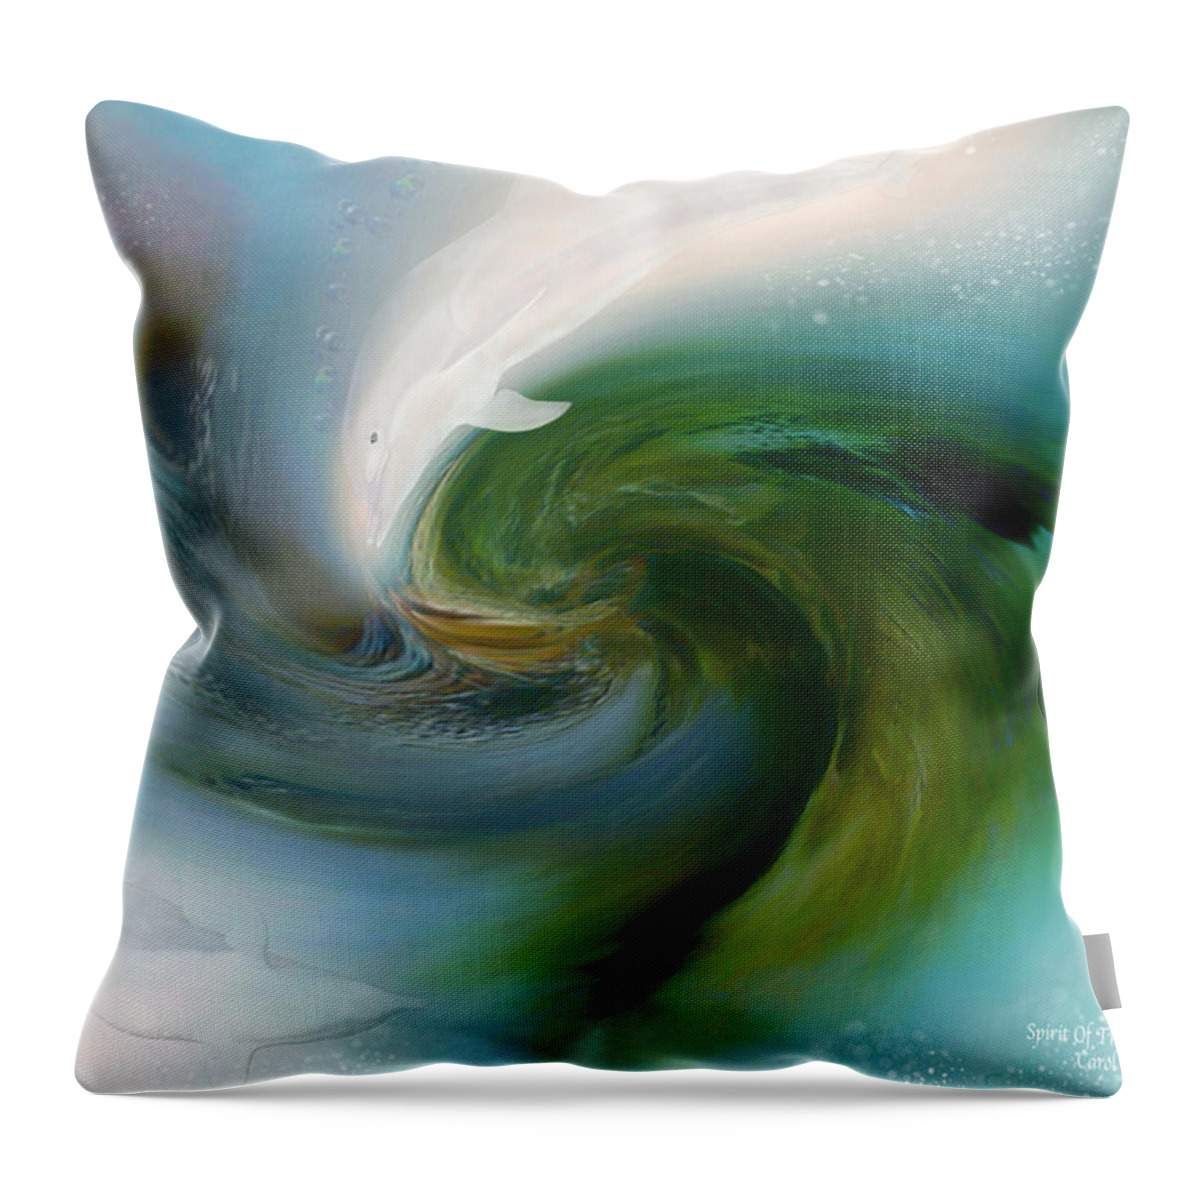 White Dolphin Throw Pillow featuring the mixed media Spirit Of The White Dolphin by Carol Cavalaris